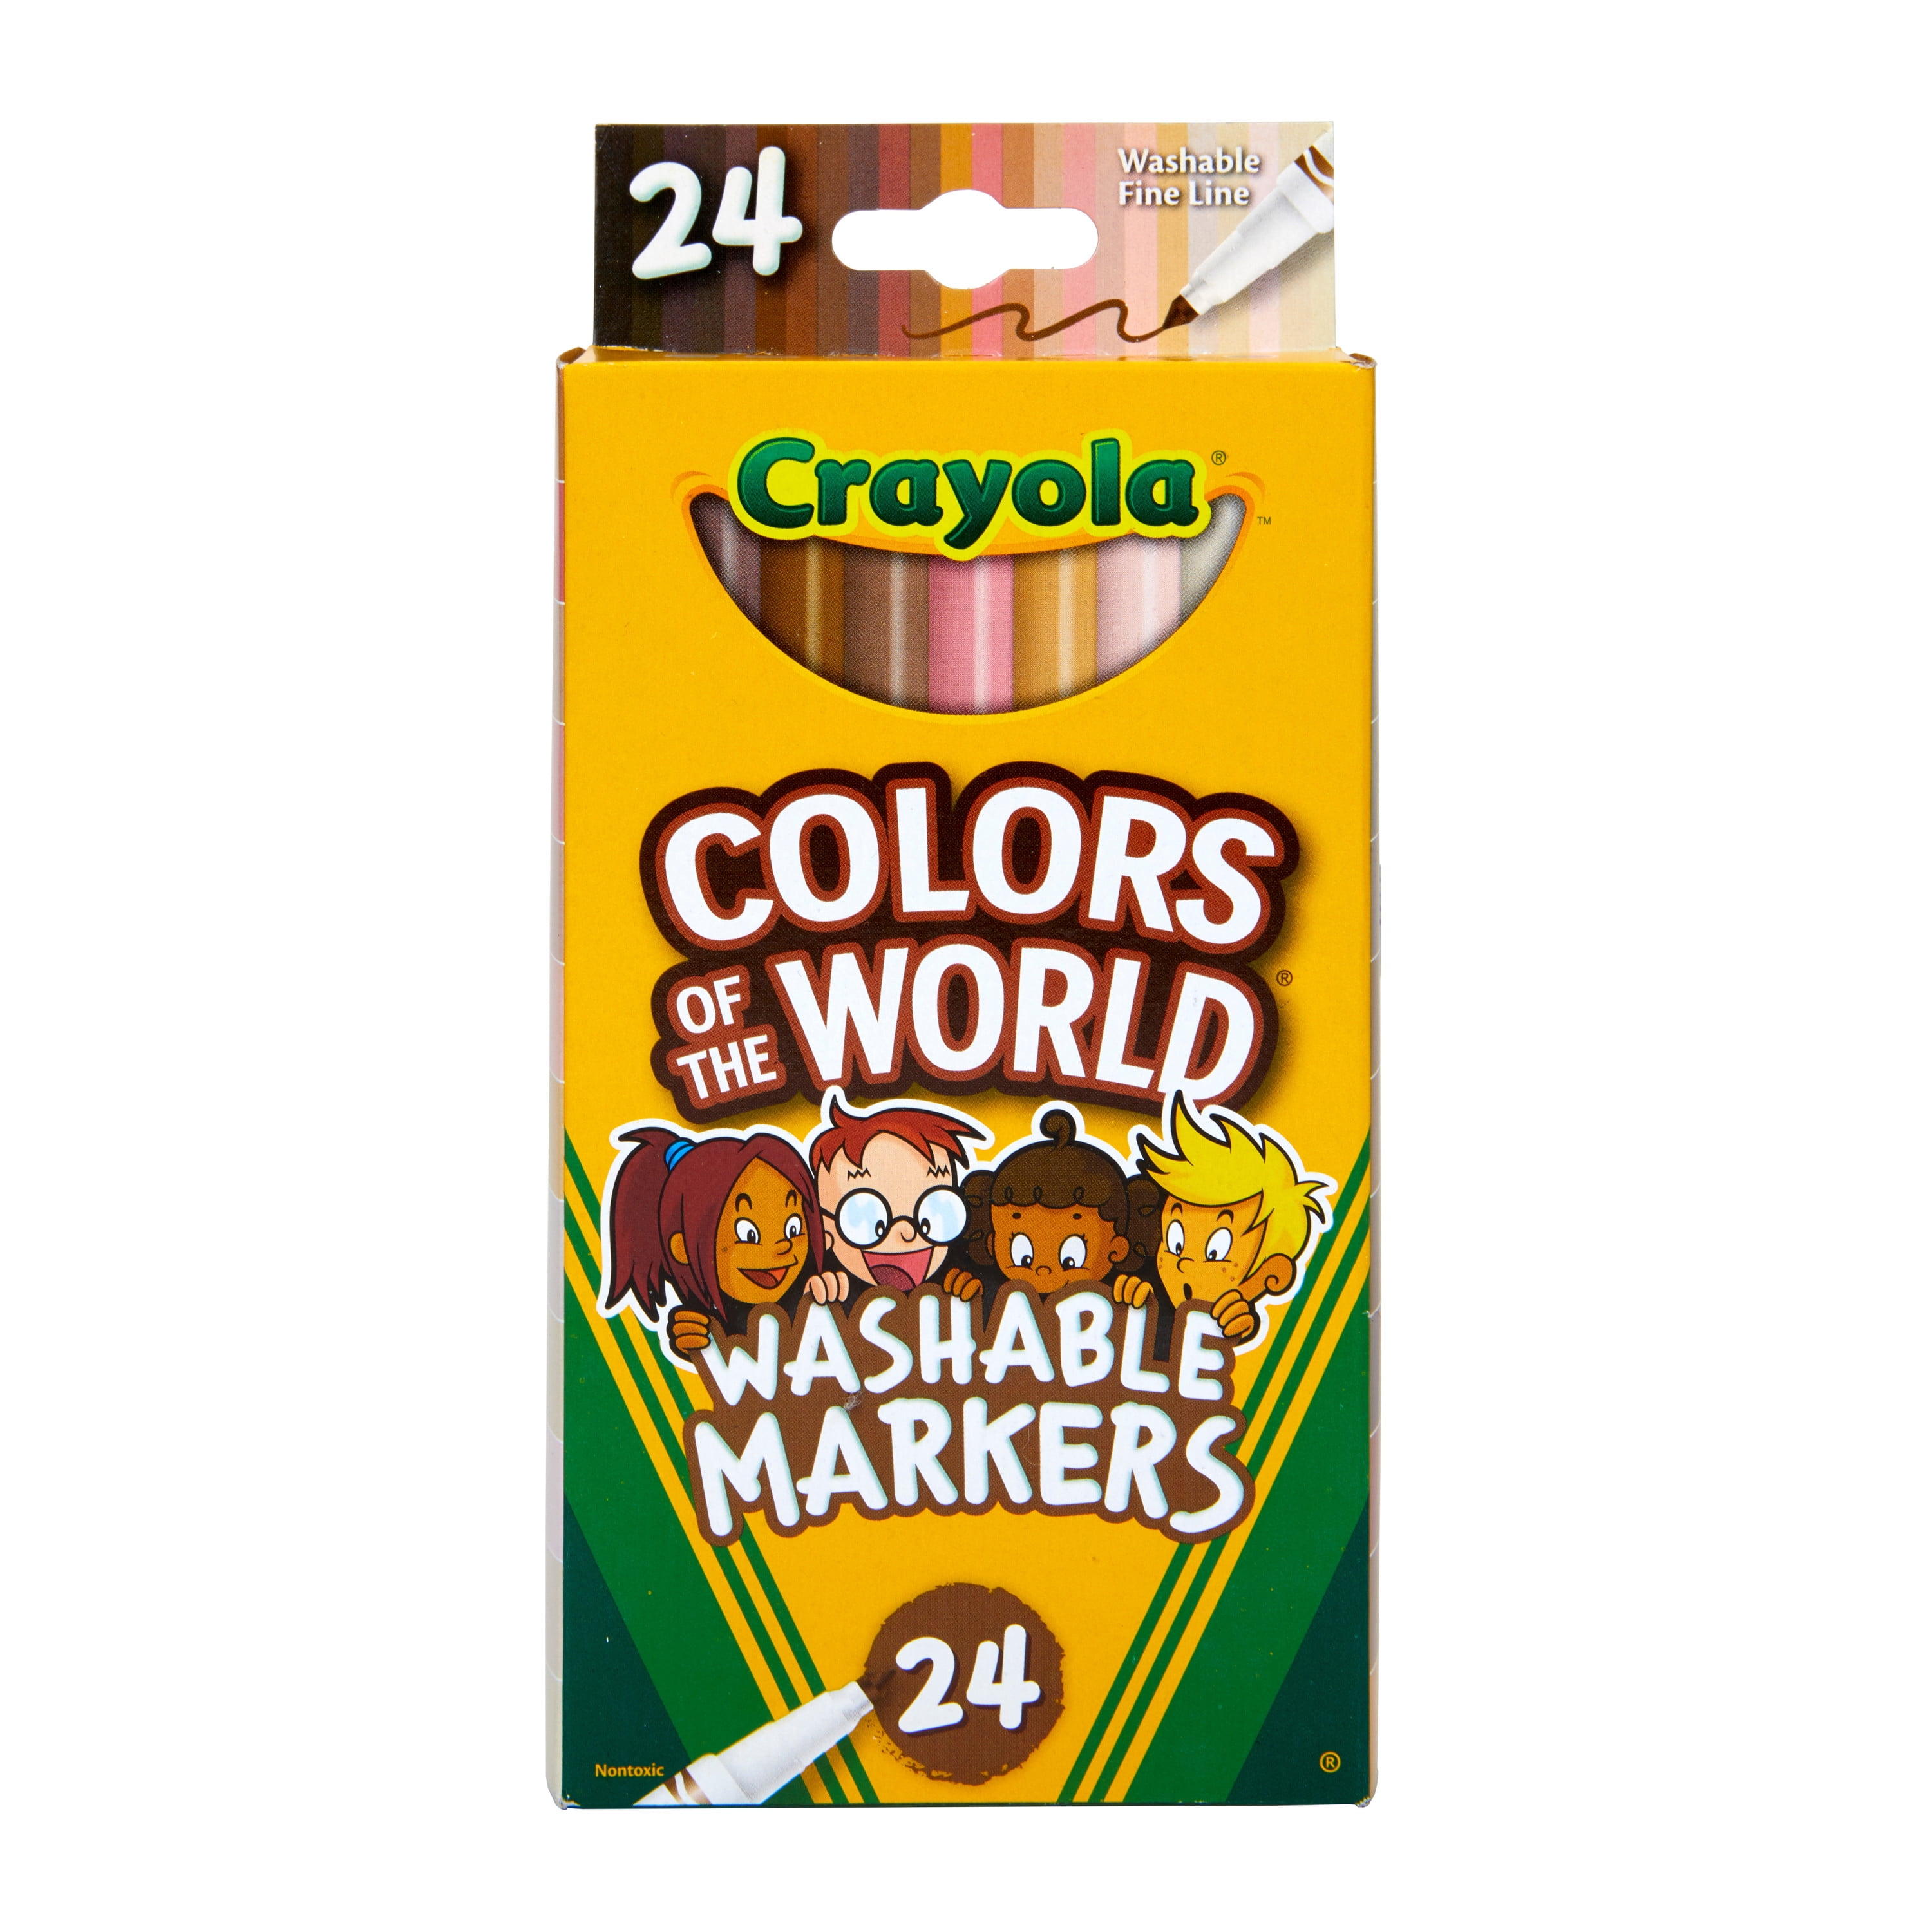 Crayola Colors of the World Markers 24 Count, Fine Line Washable Skin Tone Markers